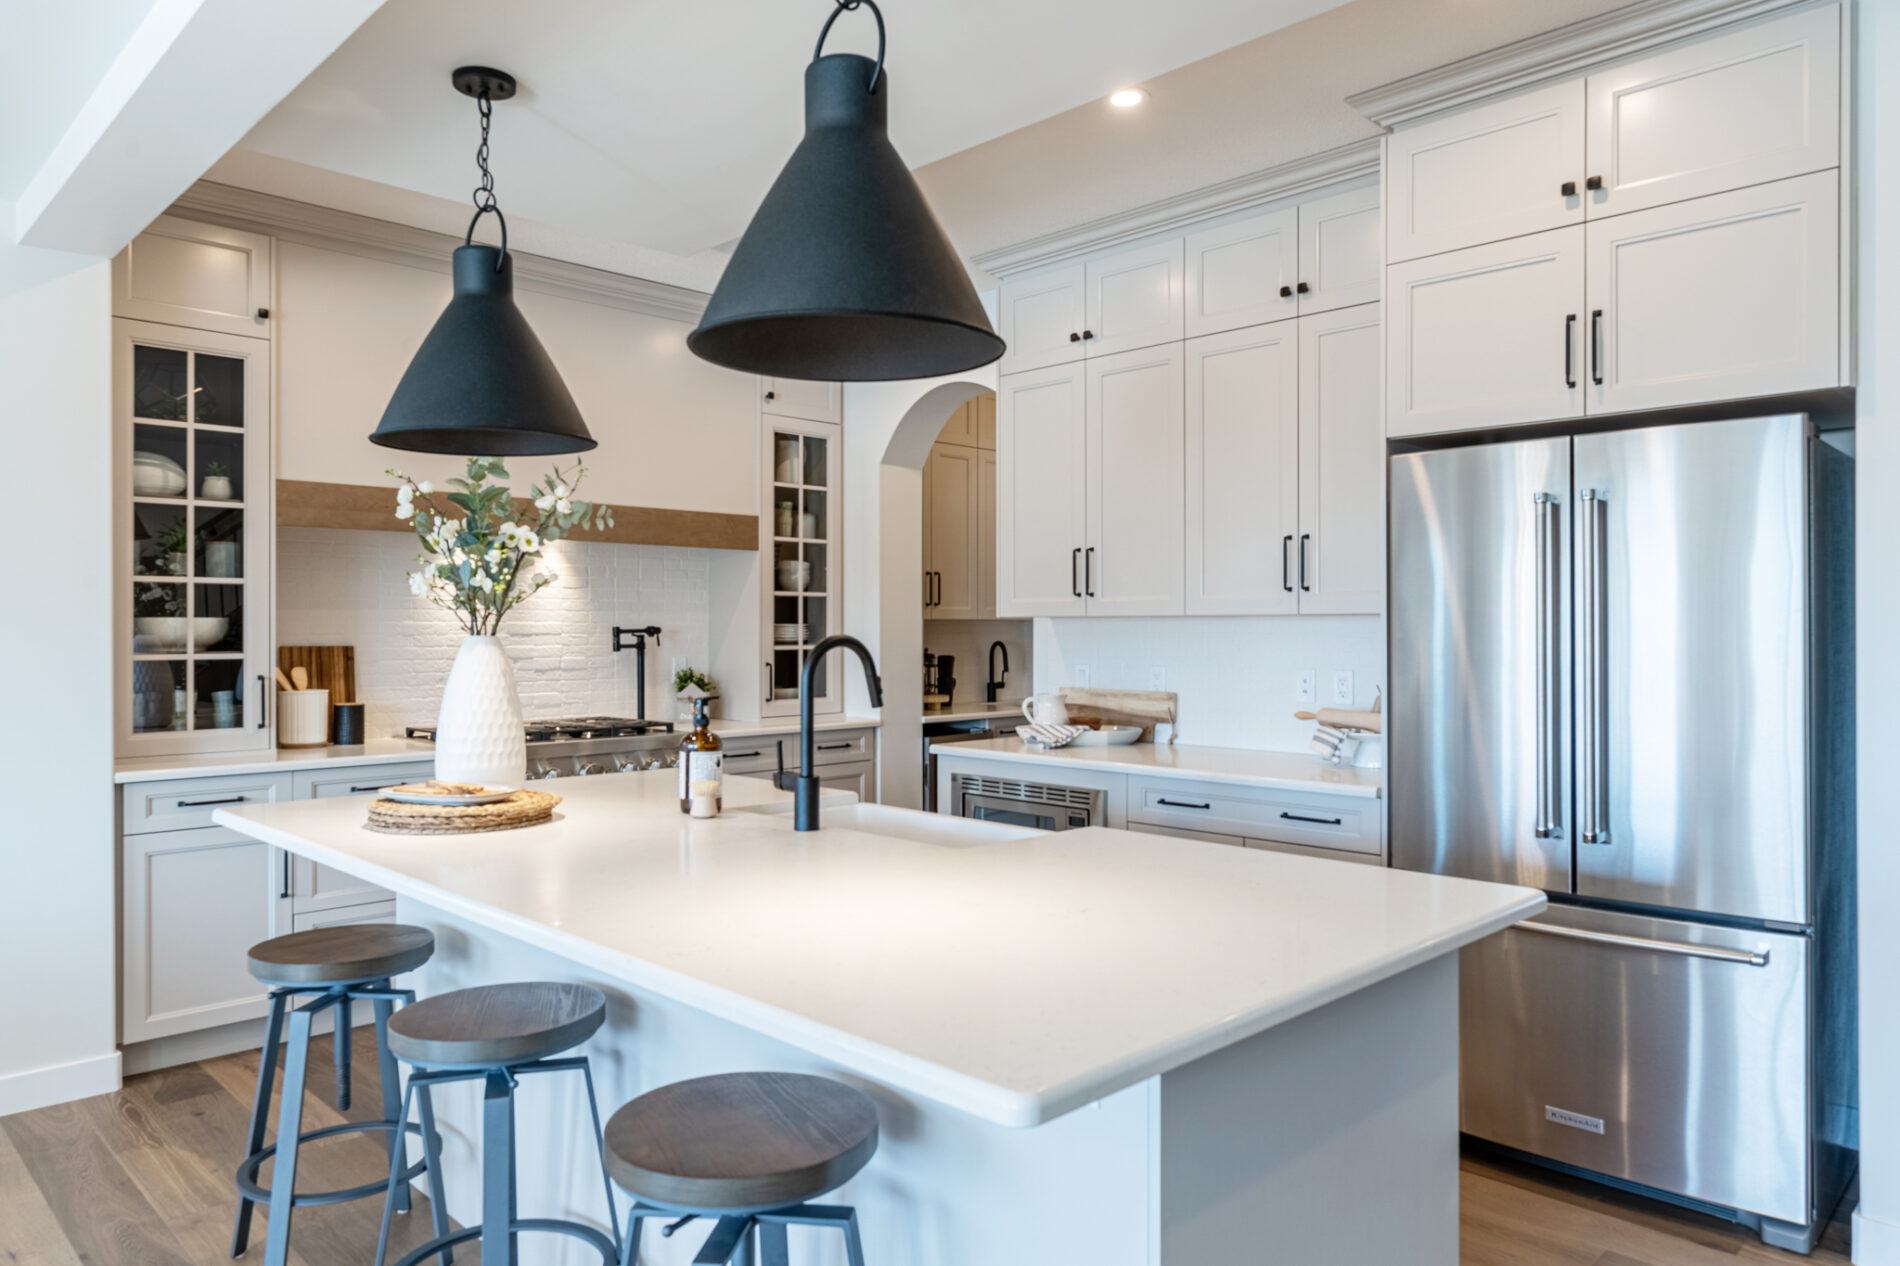 Two large black light fixtures are centered over the flush eating bar in the island of the Odessa Showhome. Black accents in the cabinets handles and stools compliment the light and airy kitchen.